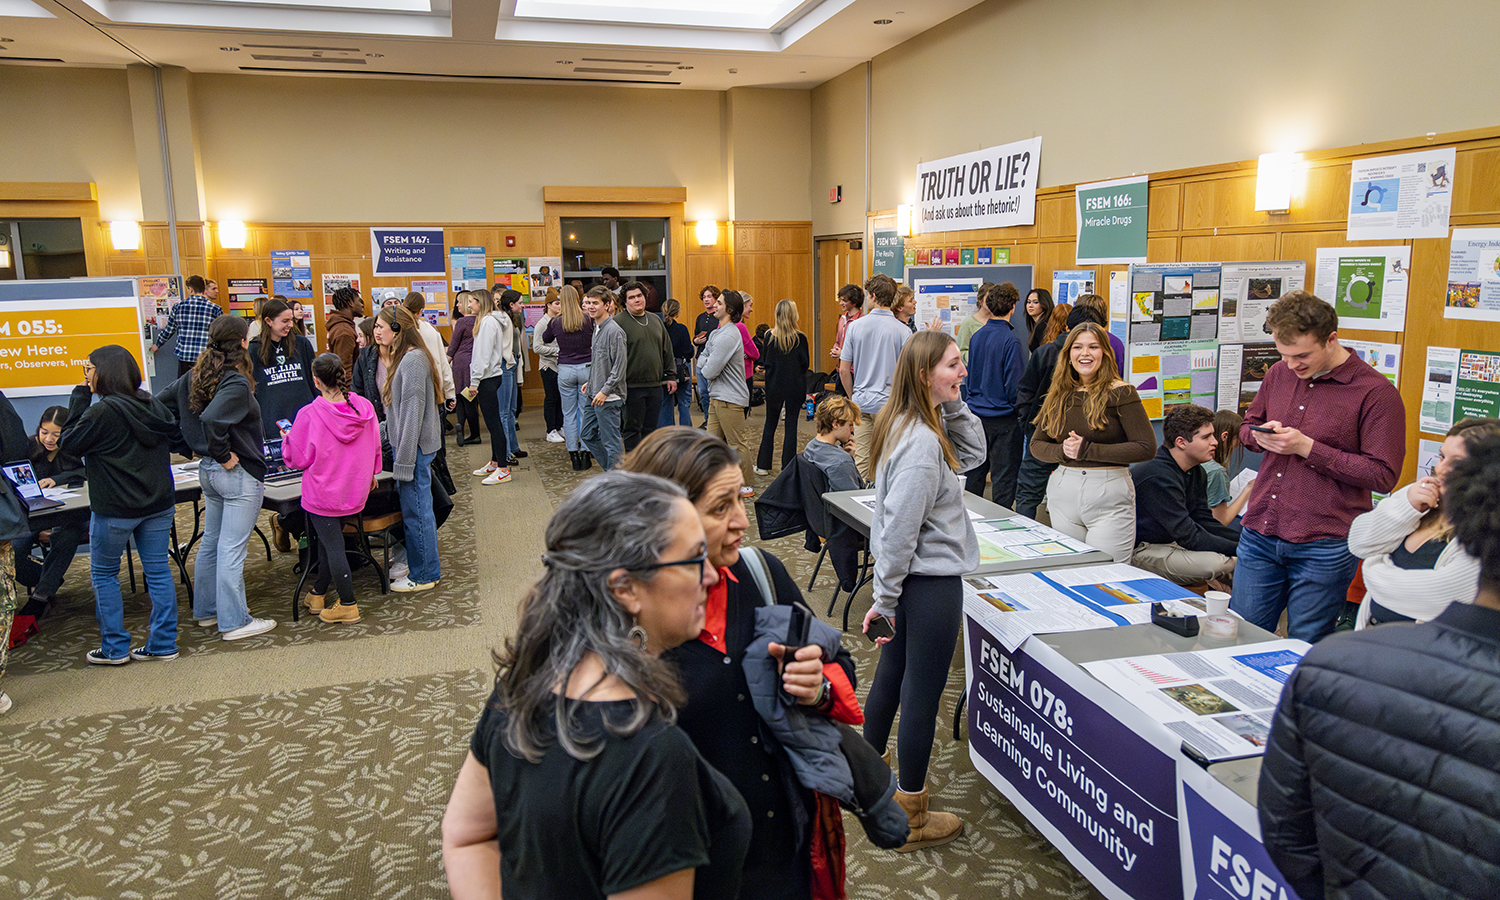 In today’s gallery, we share photos from the First-Year Seminar Symposium that gave students the opportunity to present research, artwork, writing, video and other projects to the HWS community.